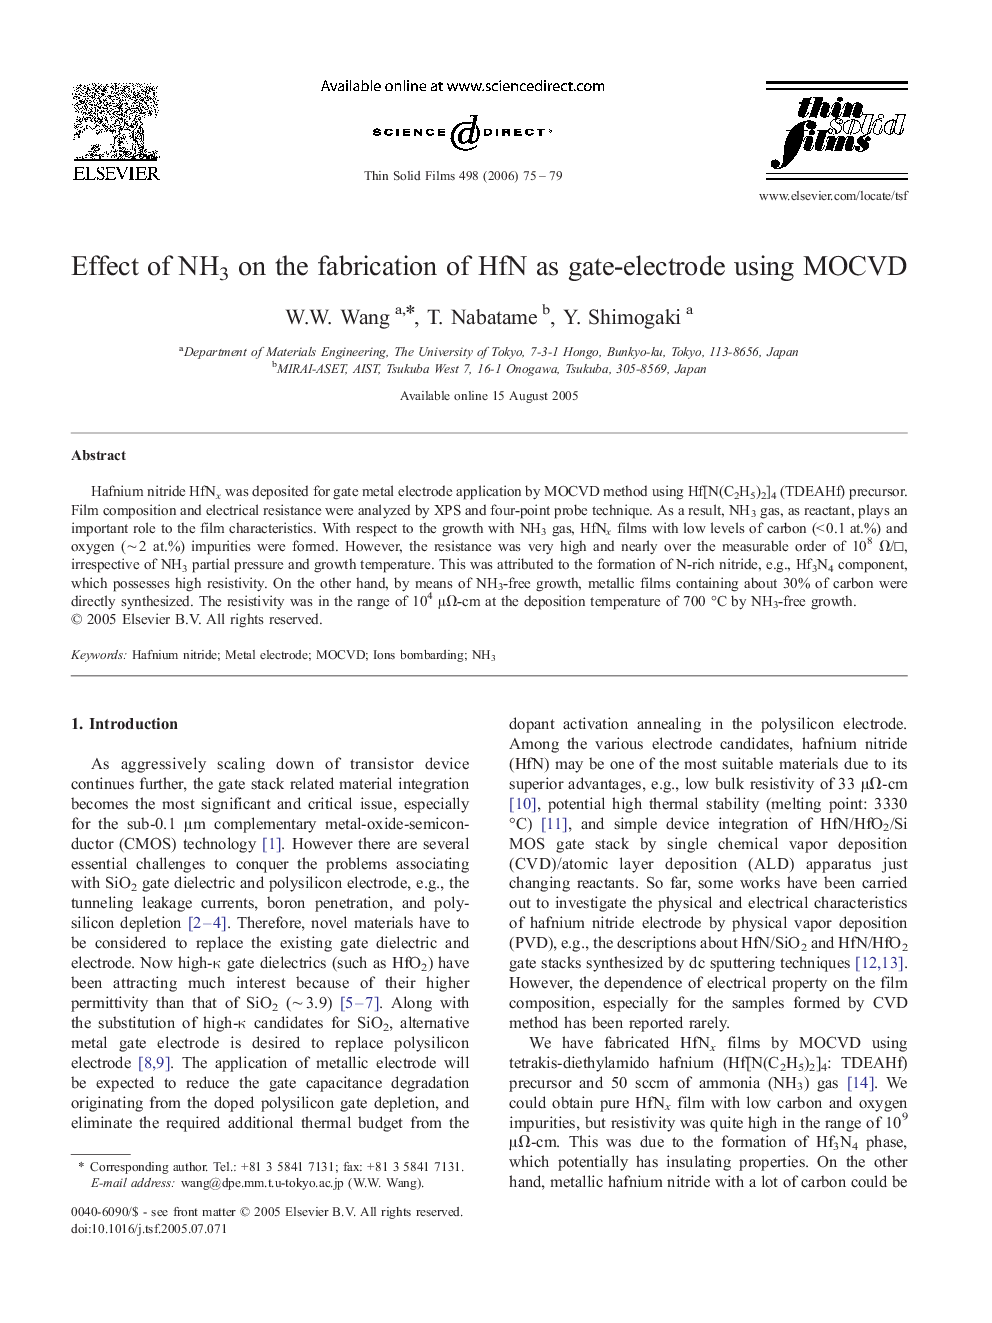 Effect of NH3 on the fabrication of HfN as gate-electrode using MOCVD